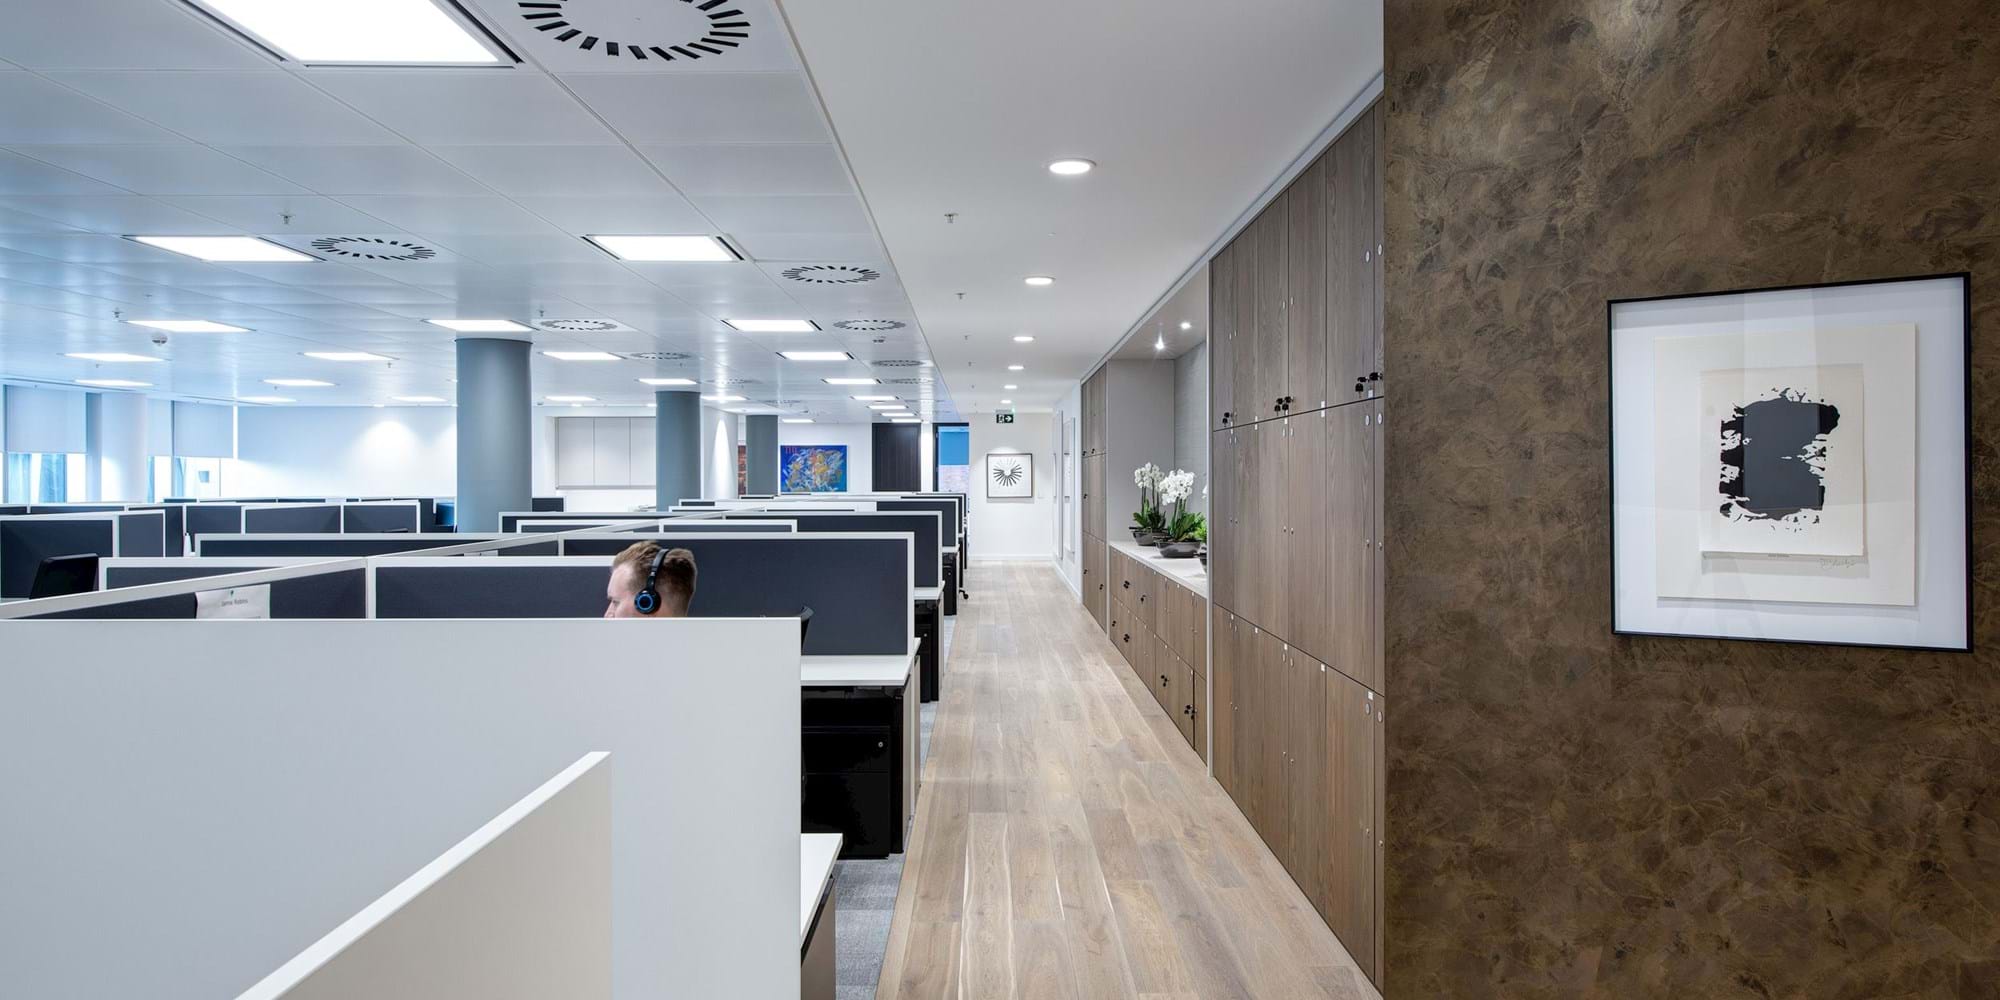 Modus Workspace office design, fit out and refurbishment - Dimension Data - Dimension Data 16 highres sRGB.jpg